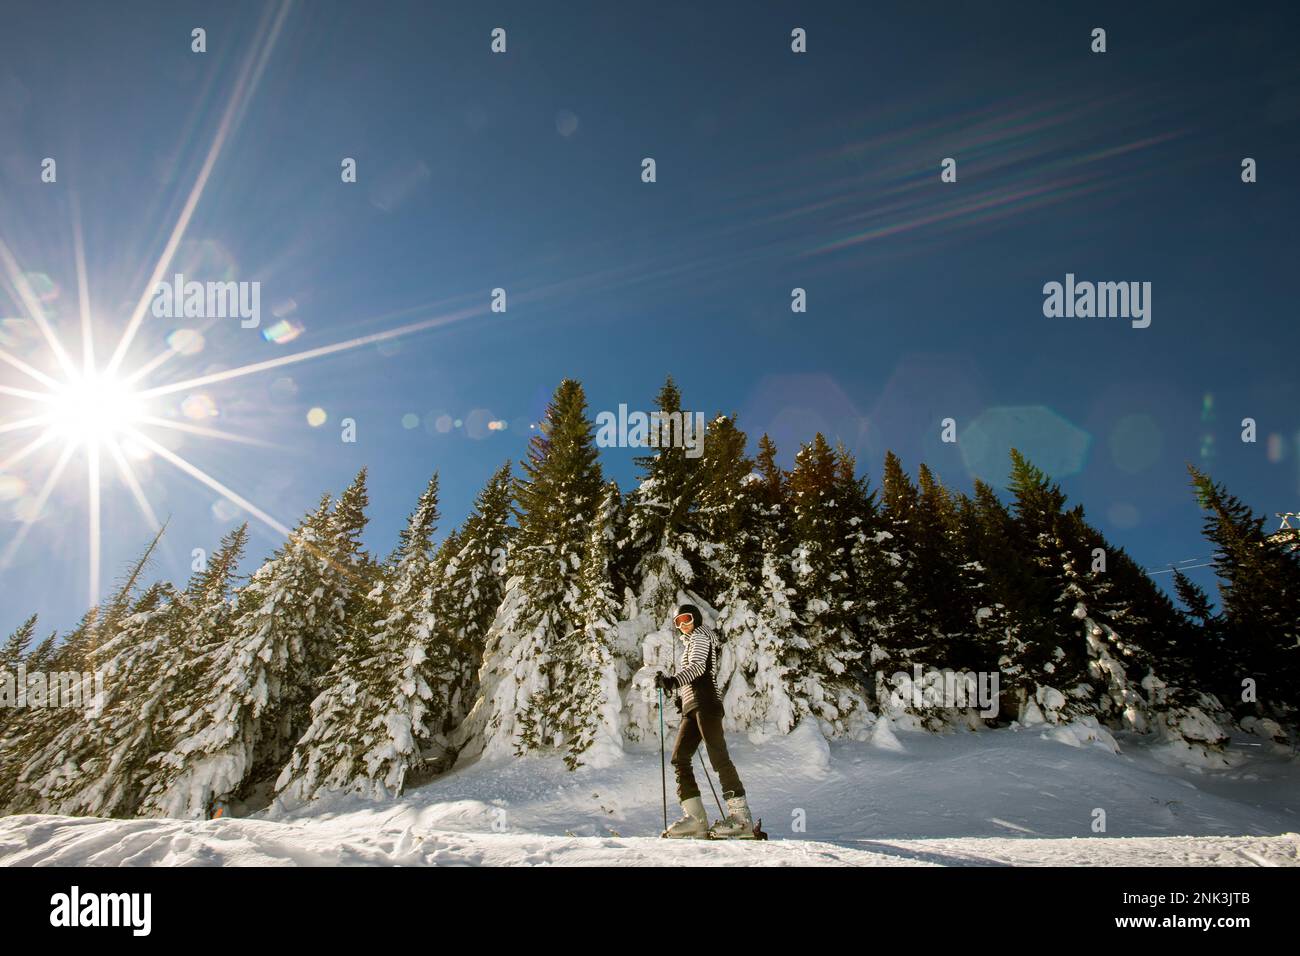 A single young female enjoys a sunny winter day of skiing, dressed in full snow gear with ski boots and sunglasses Stock Photo